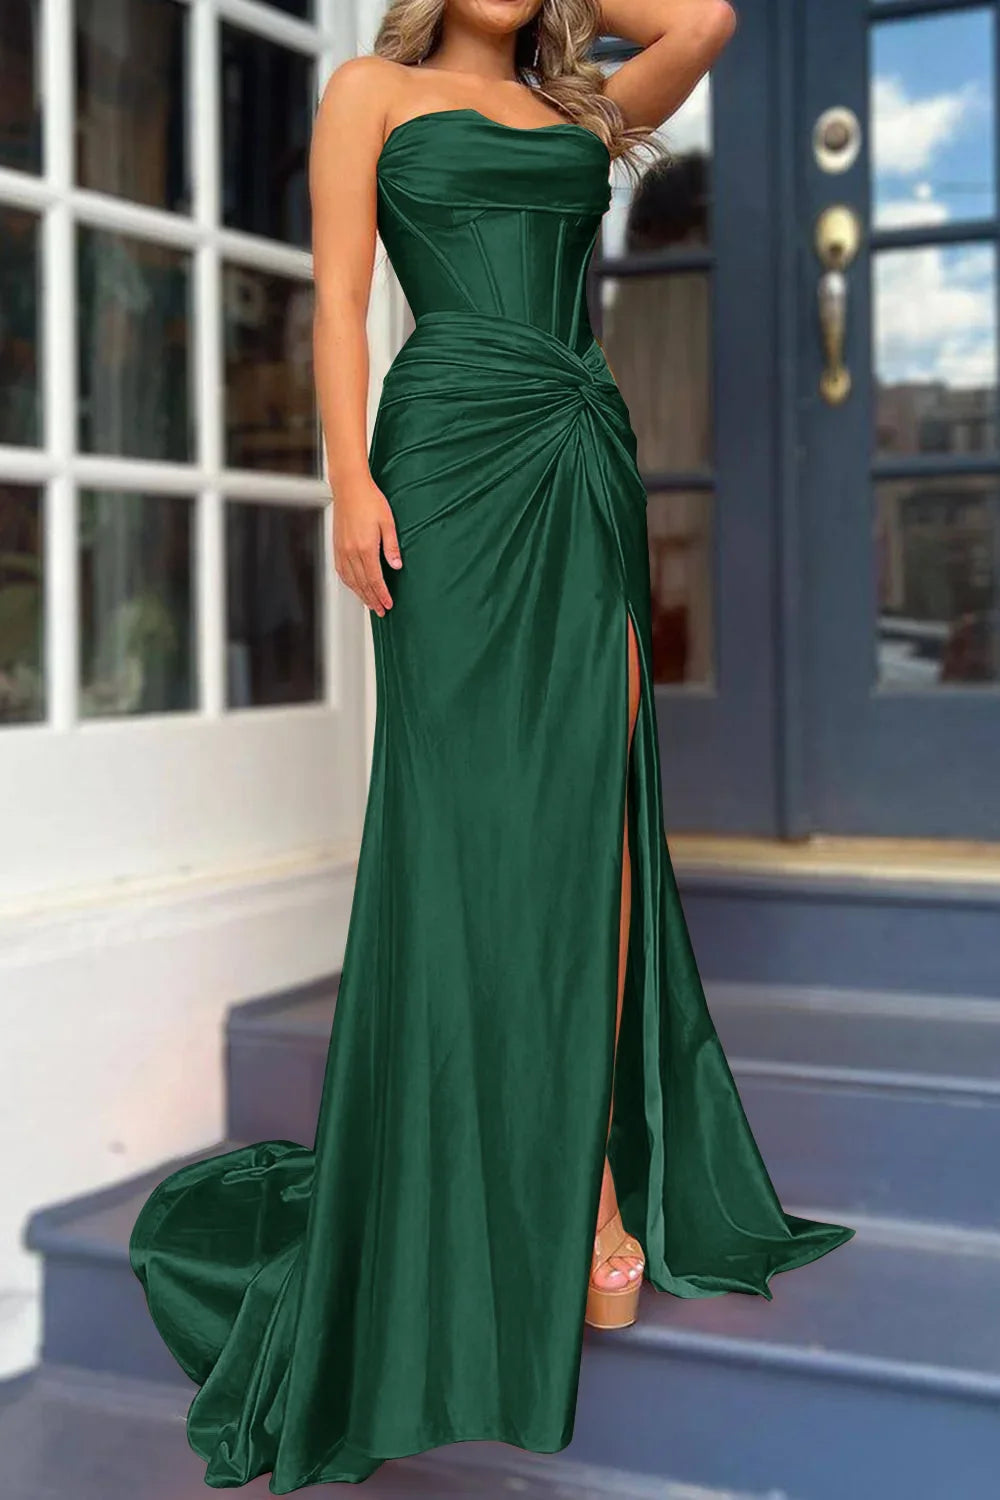 Green Party Maxi Dress - Buy Green Party Maxi Dress online in India